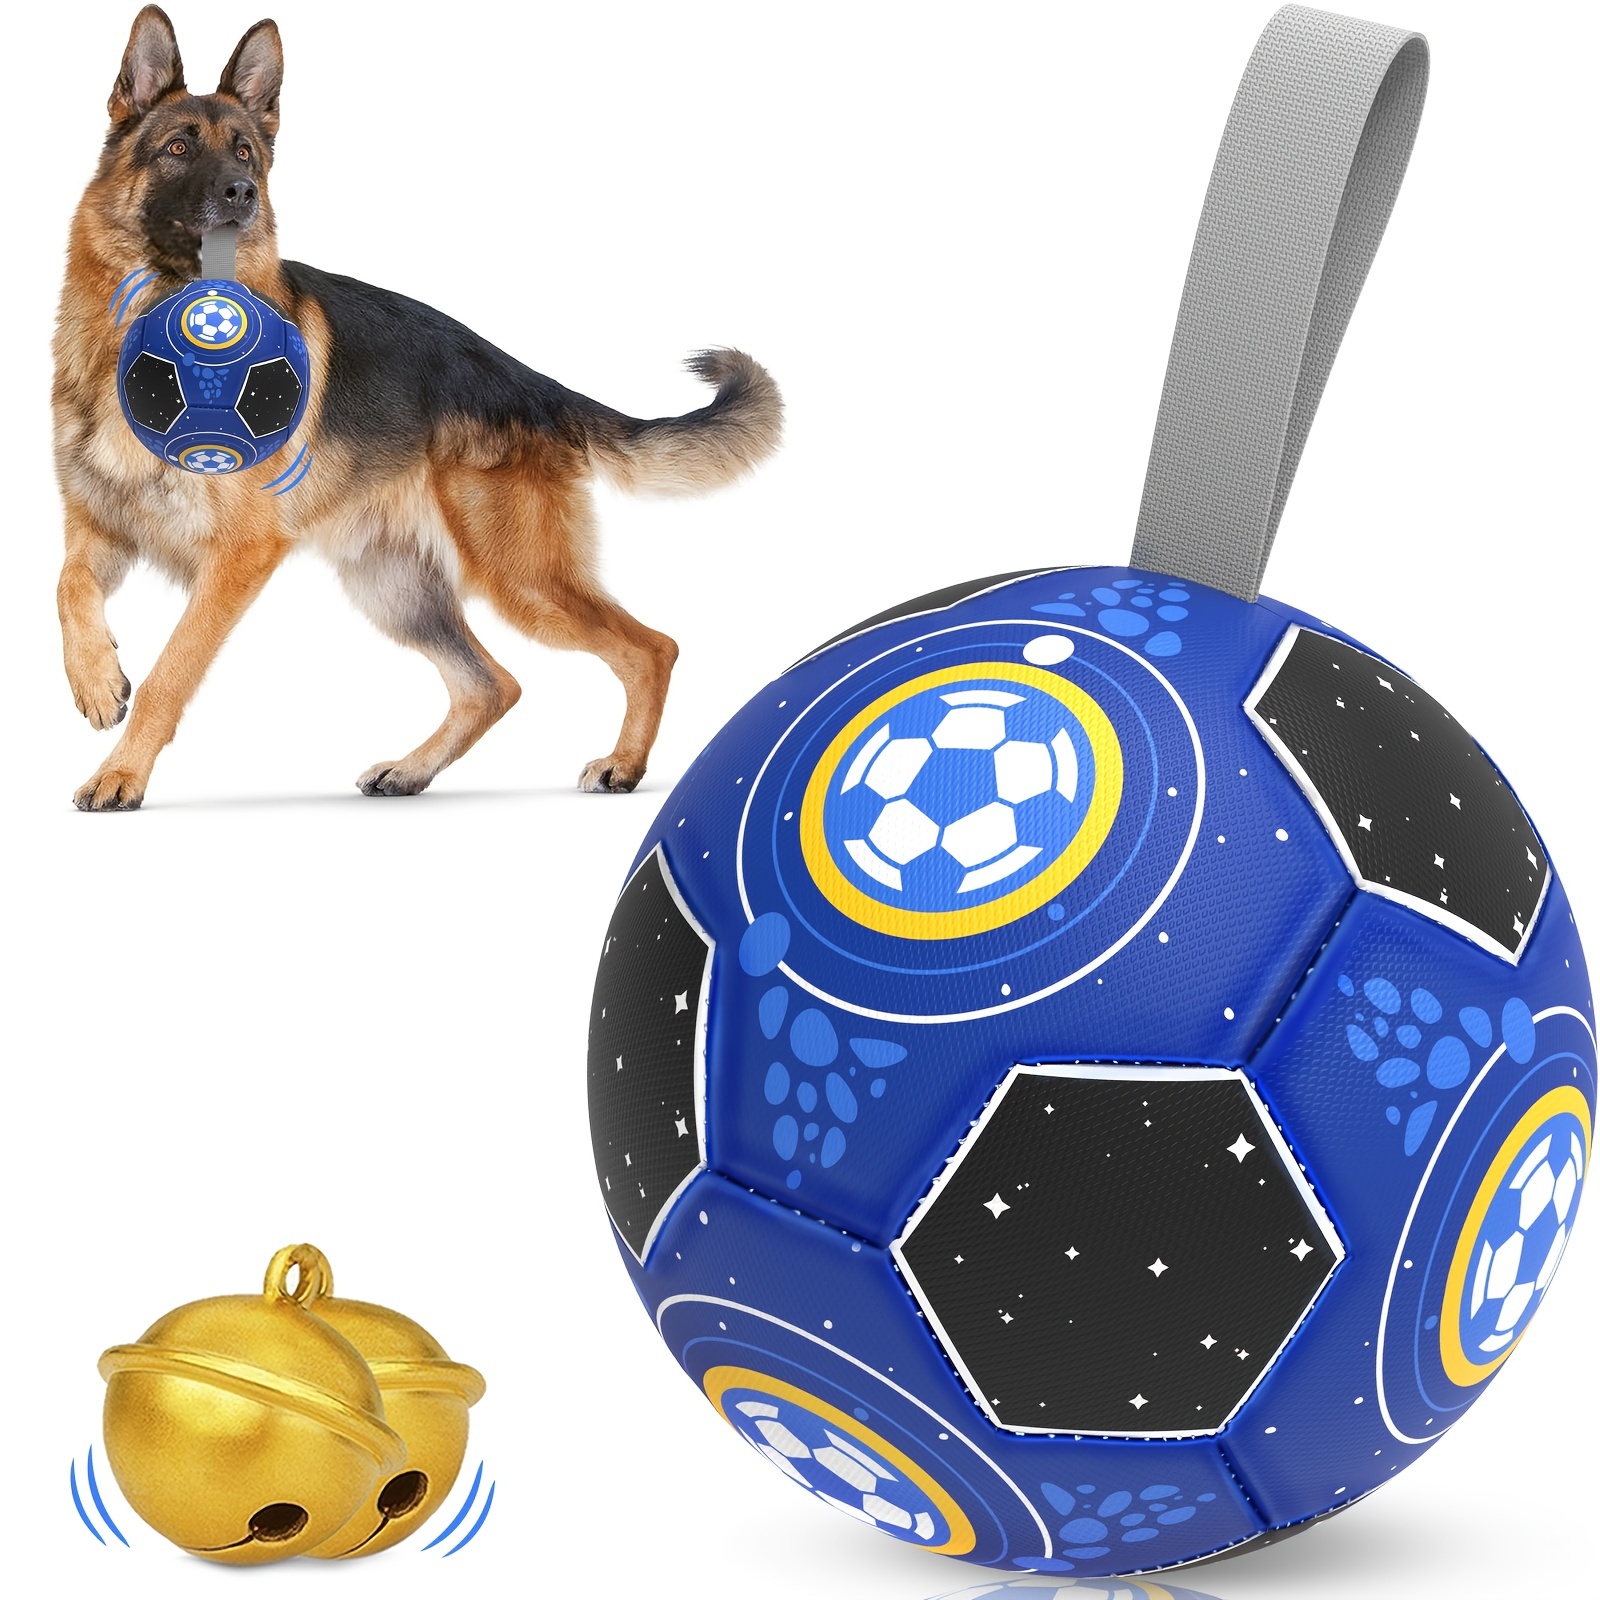 

1pc Durable Football Design Pet Toy With Straps Dog Chewing Ball Toy With Bell For Training Playing Teeth Cleaning, Interactive Fetch Pet Toy For Small Medium Large Dogs